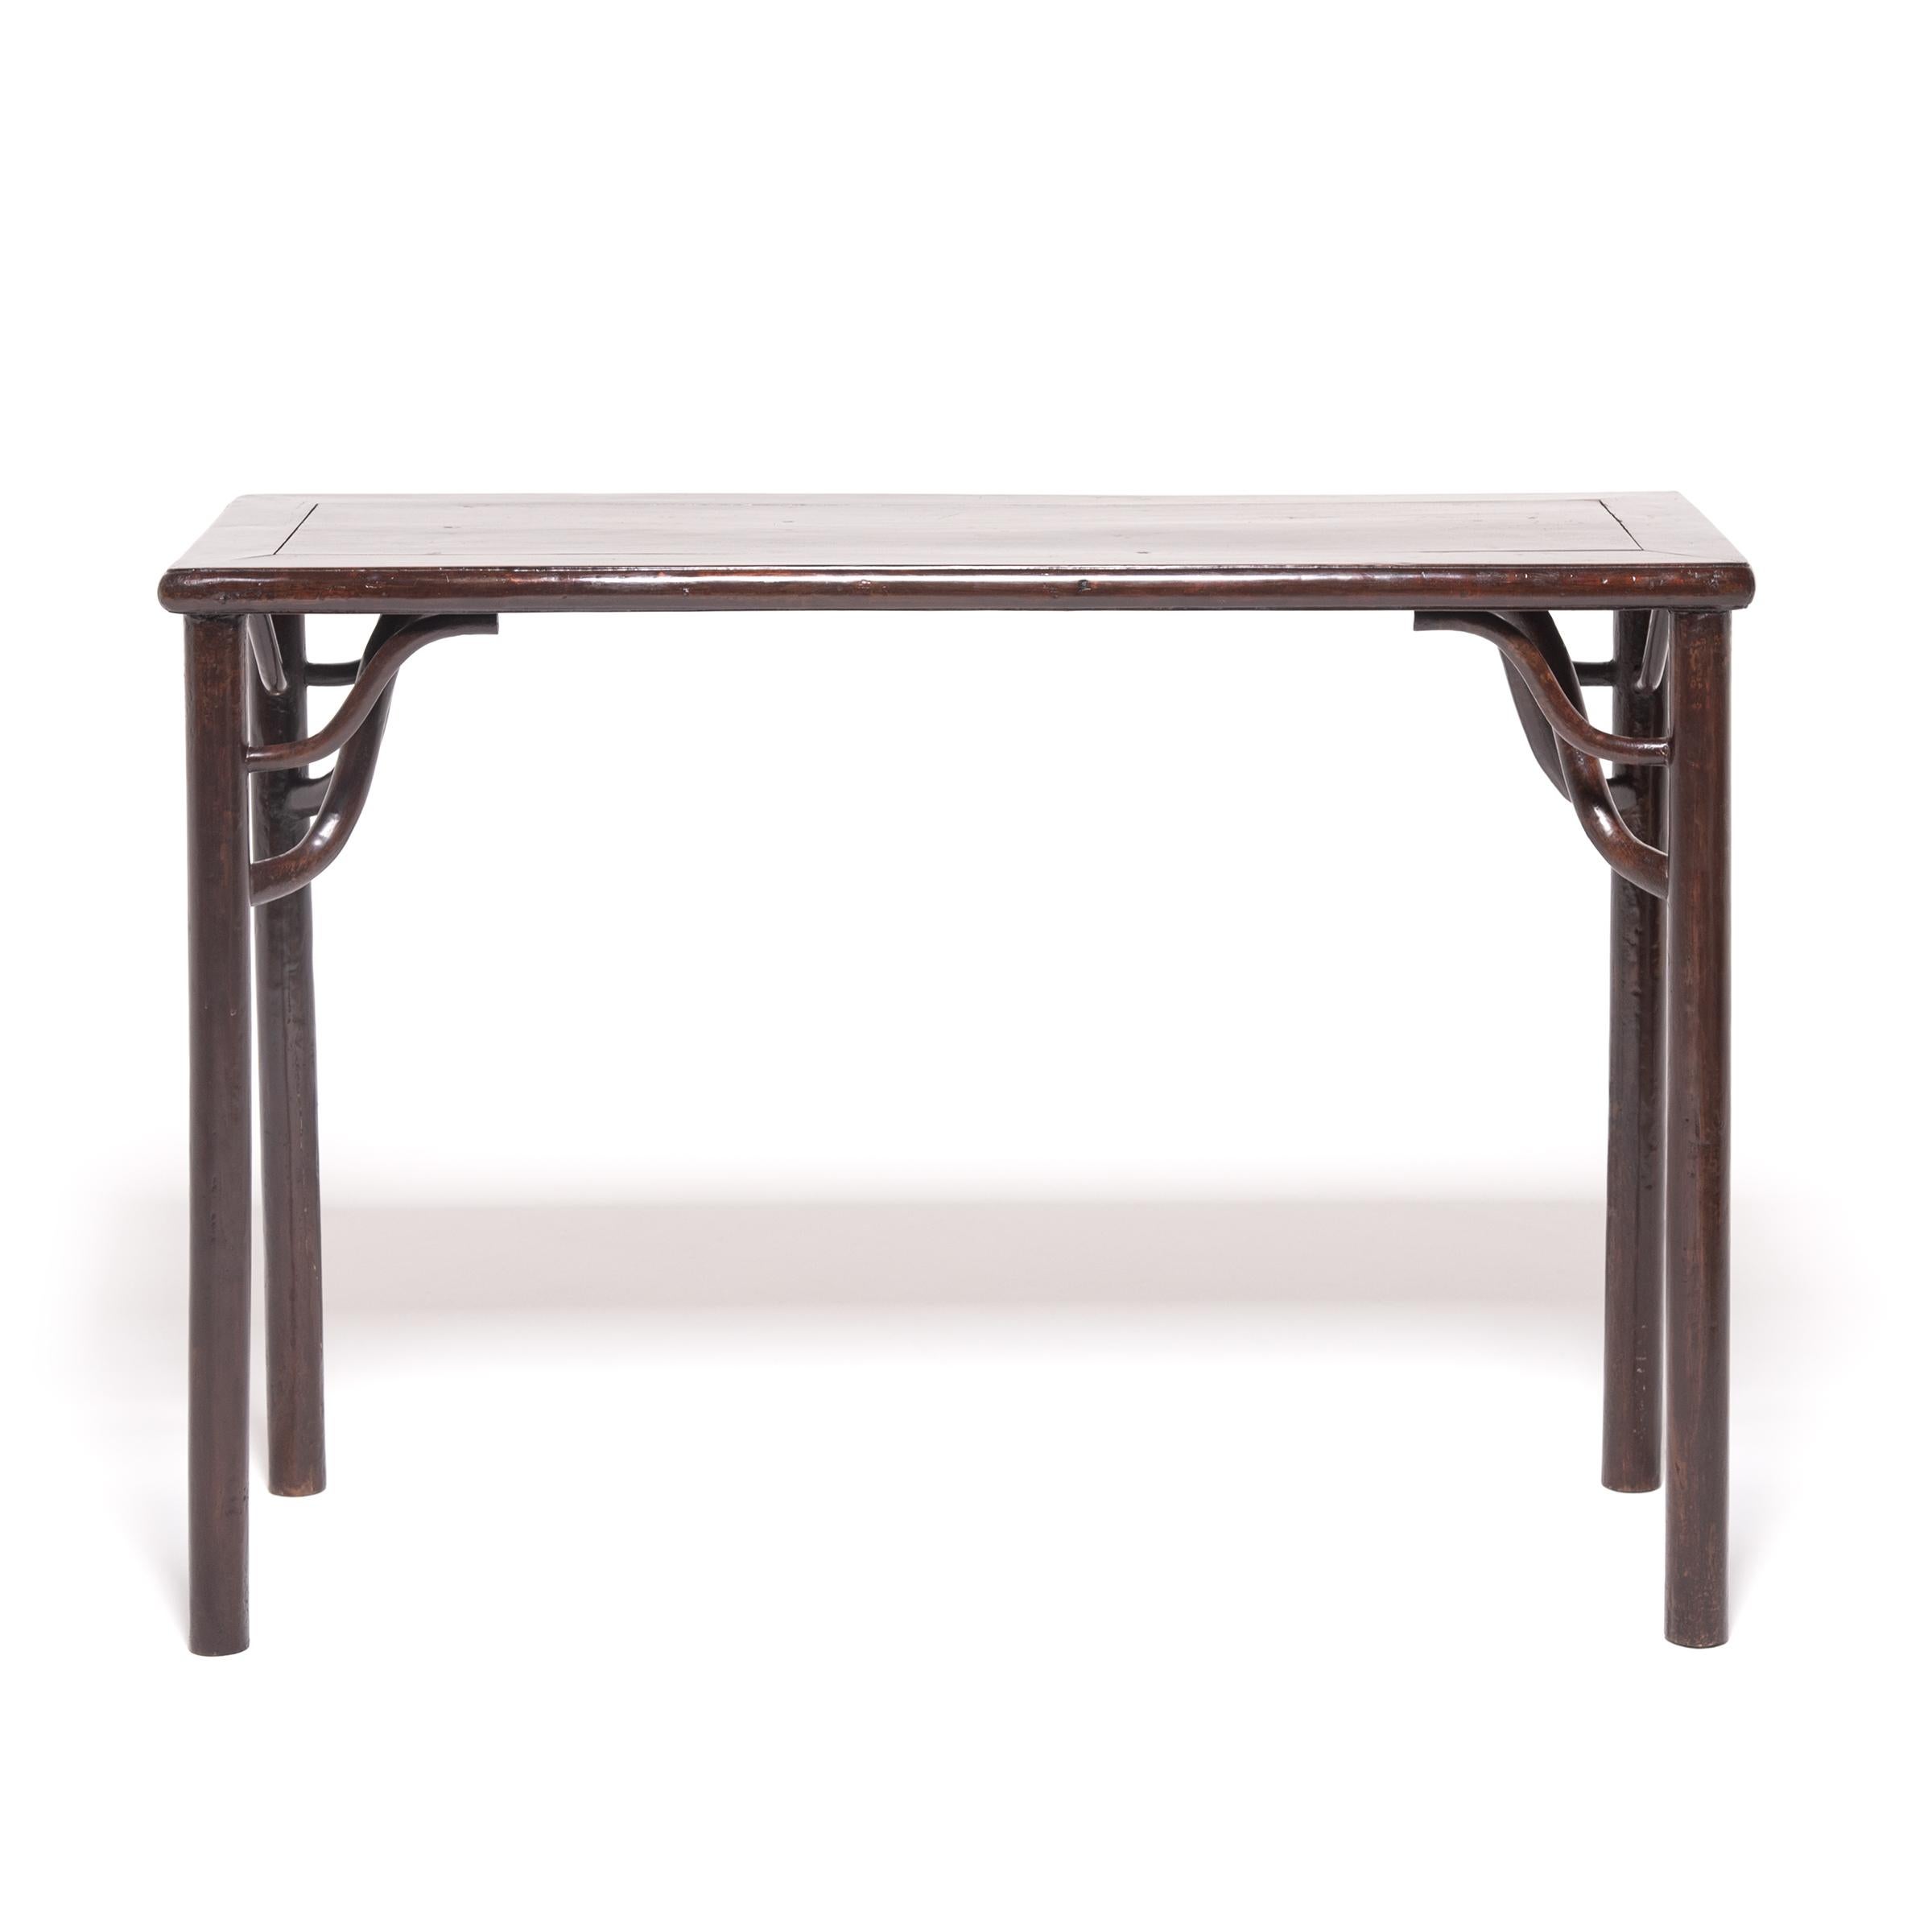 A tradition dating back to the Northern Song dynasty, 960 to 1126 AD, wine tables have been used for centuries at social gatherings as a spot to converse, sip wine, and make toasts. This 19th century elmwood table celebrates this time-honored